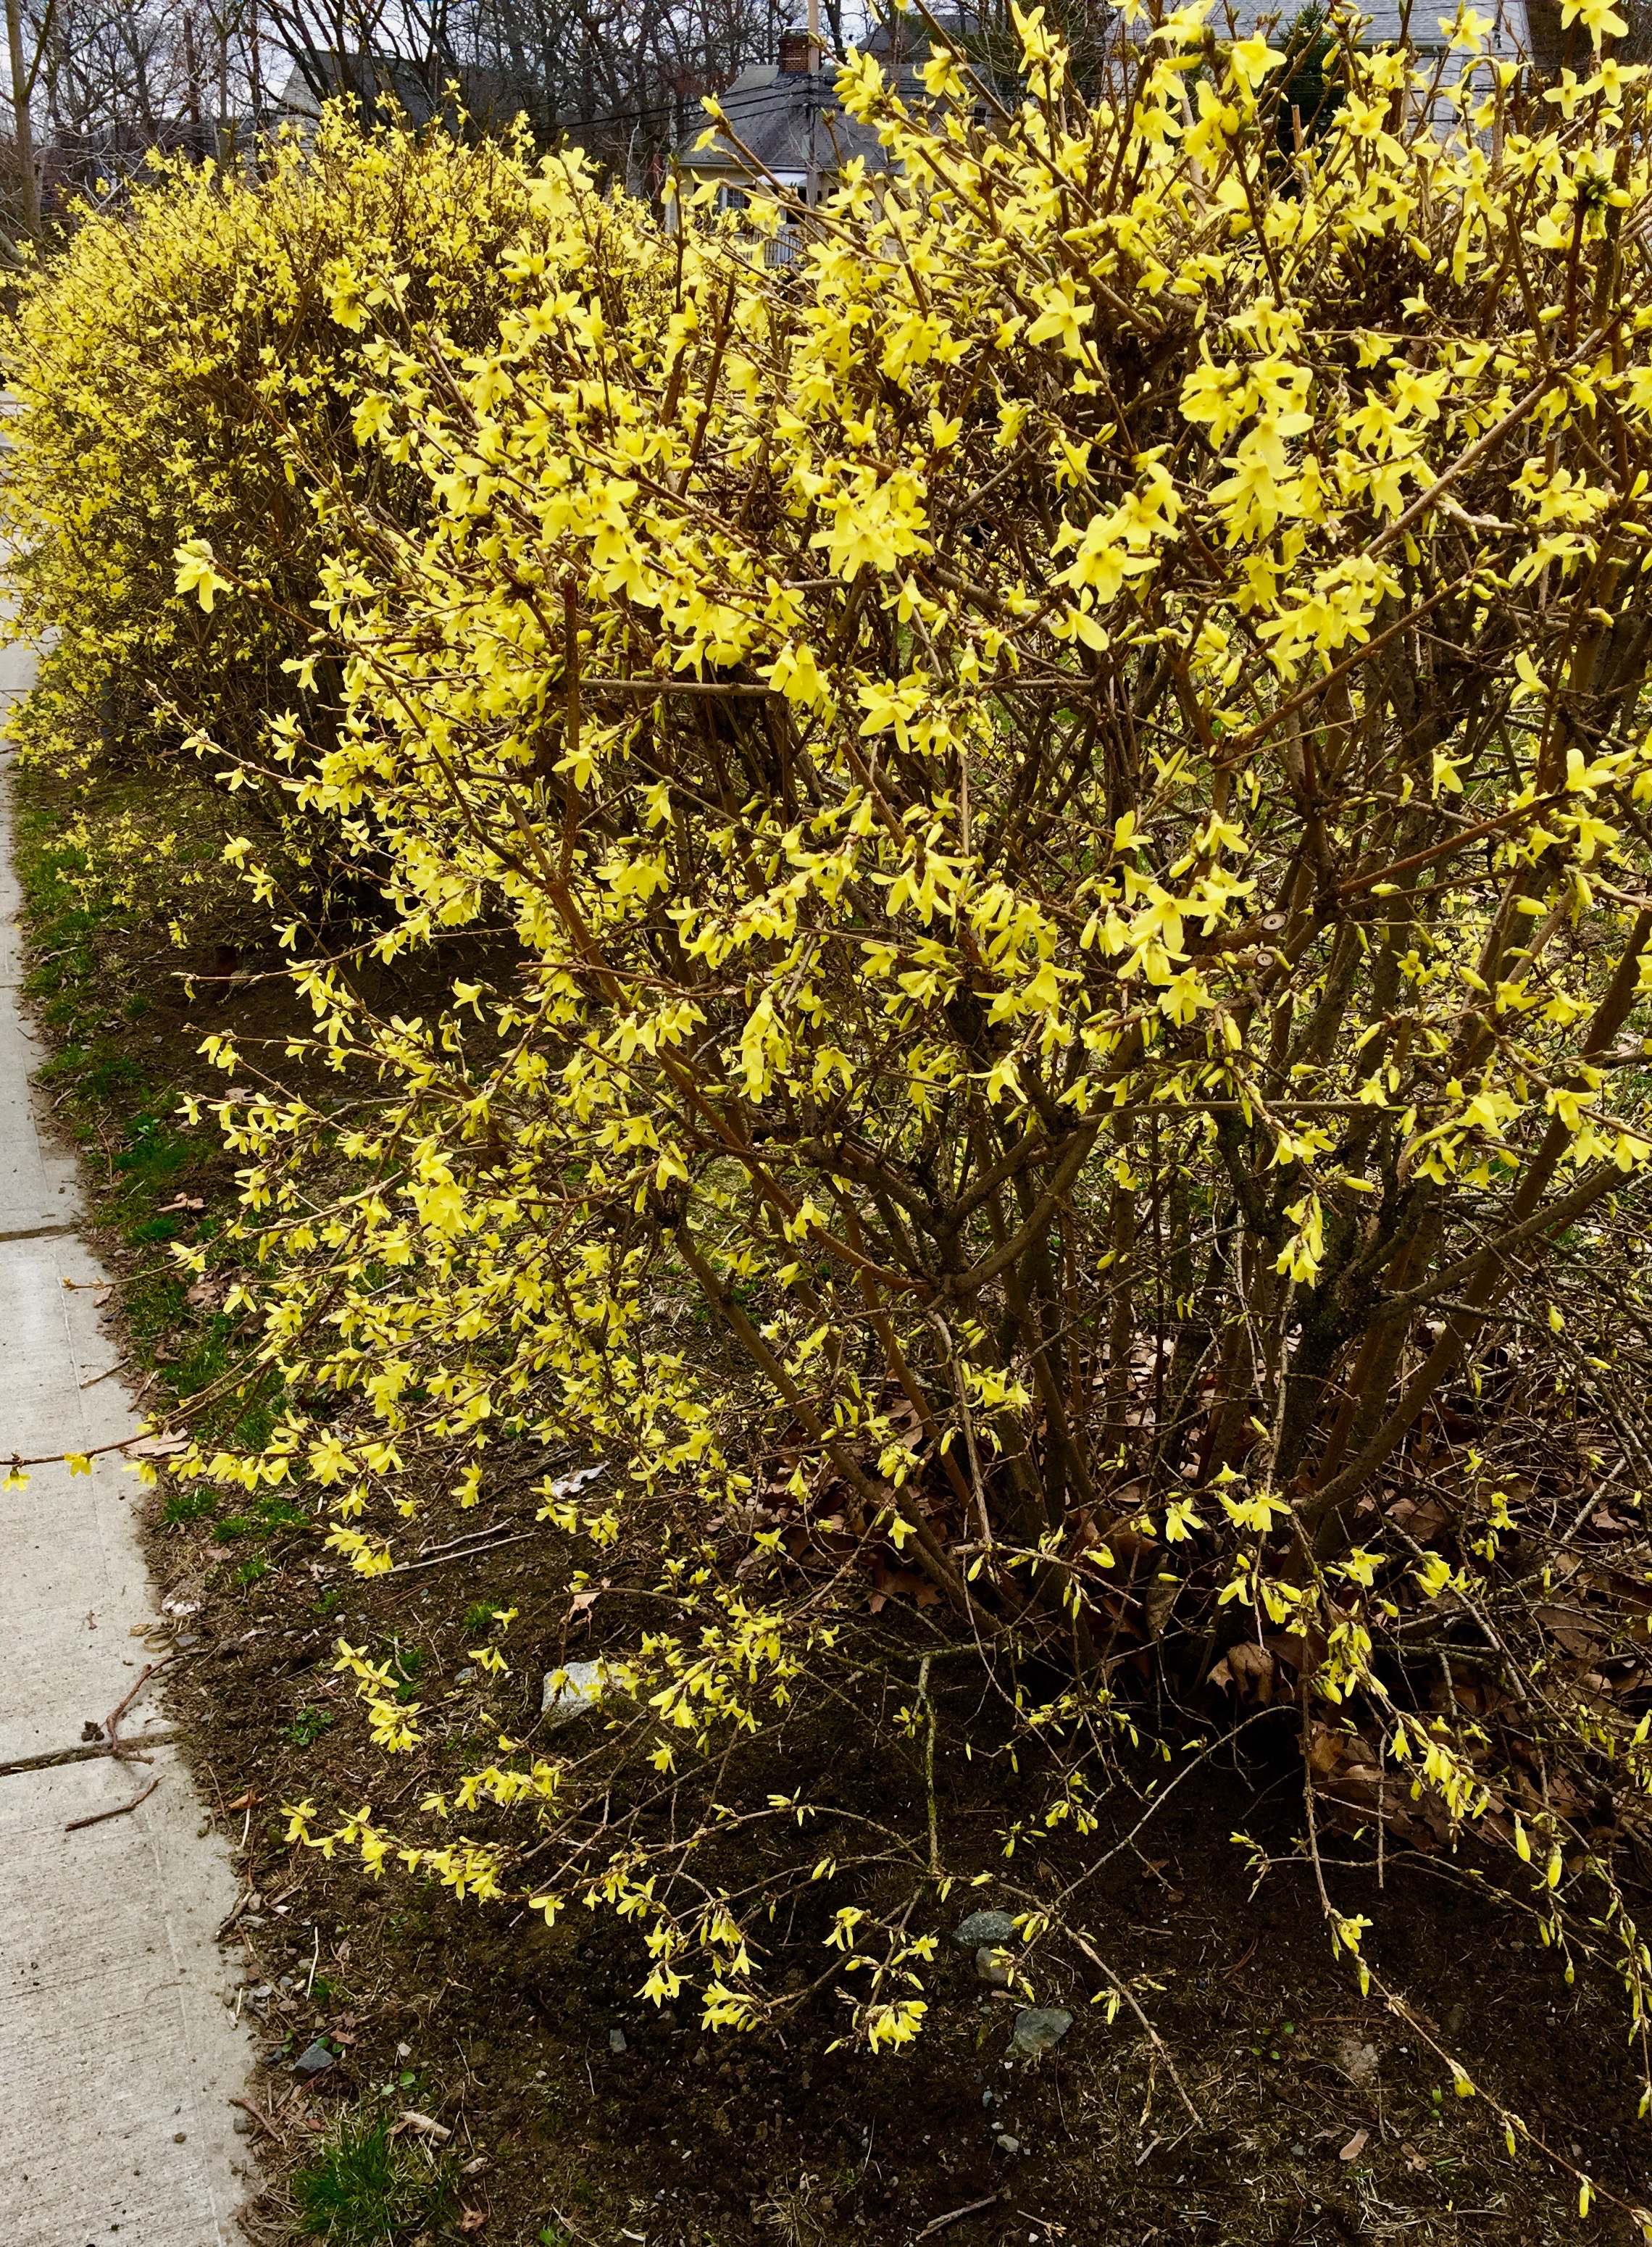 It's the weekend! Number 49, Forsythia Hedge